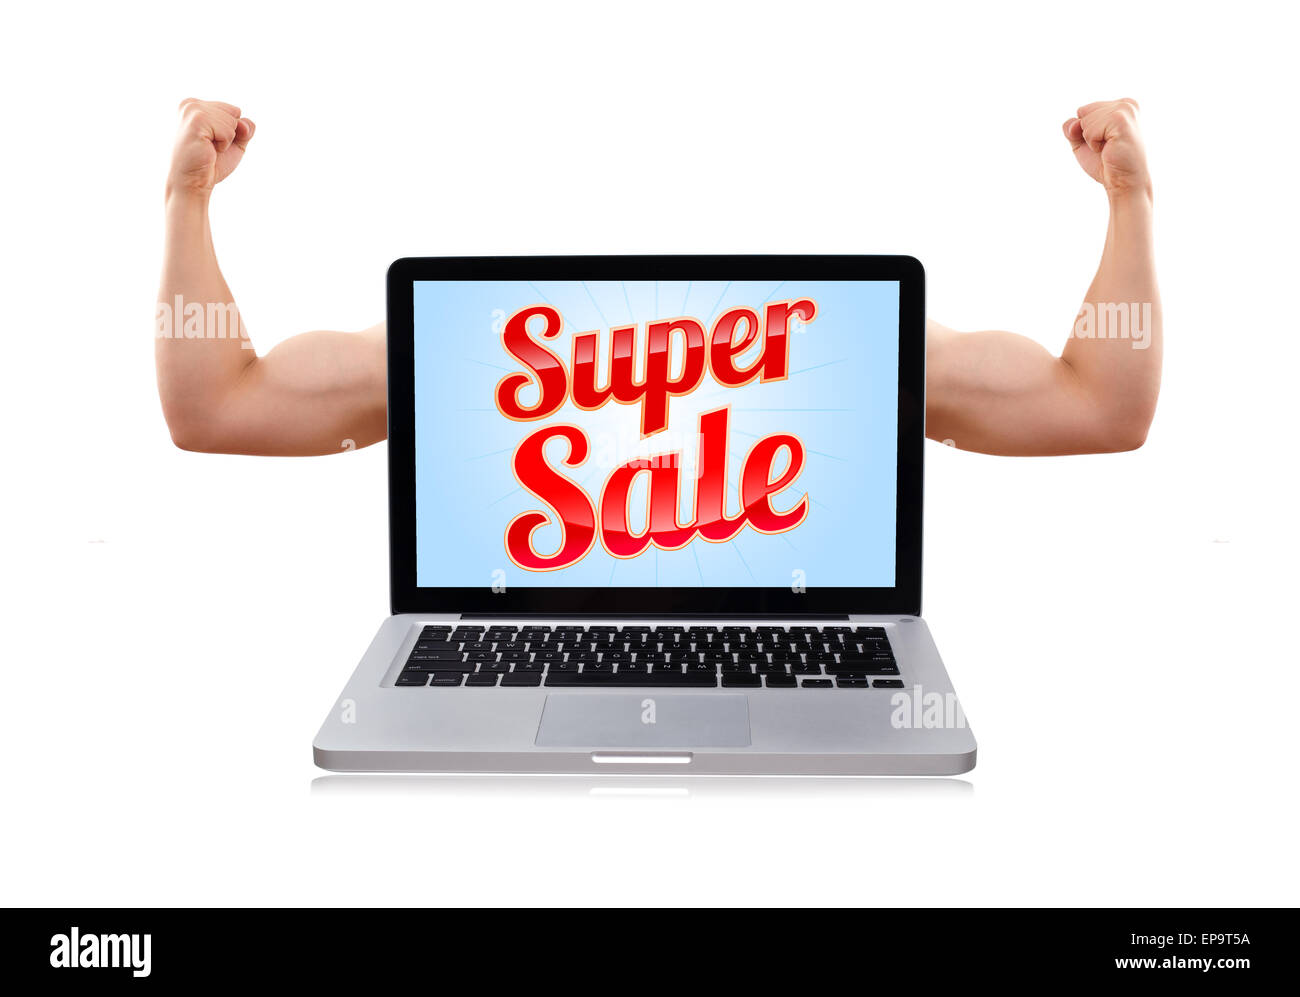 Laptop with super sale sign and muscular biceps Stock Photo